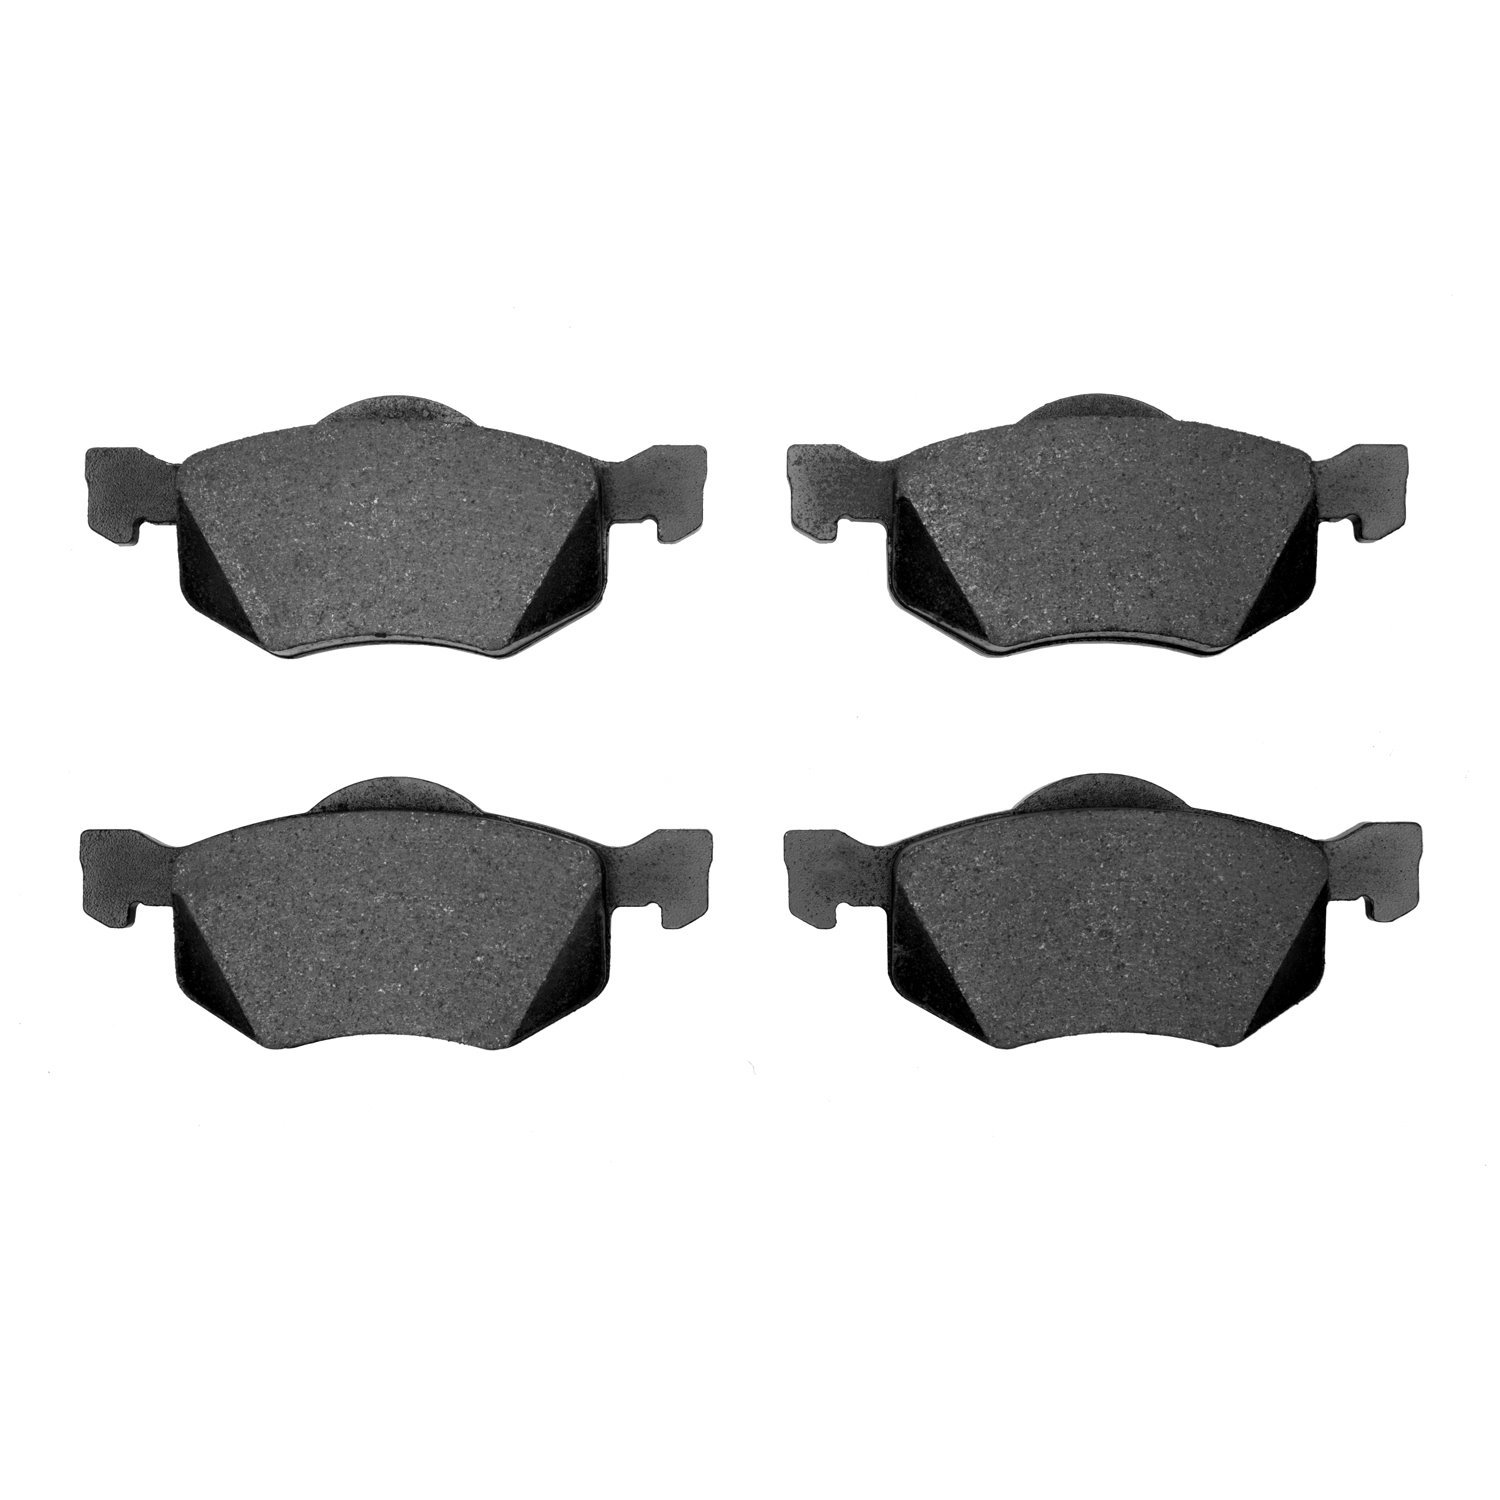 1310-0843-00 3000-Series Ceramic Brake Pads, 2001-2007 Ford/Lincoln/Mercury/Mazda, Position: Front